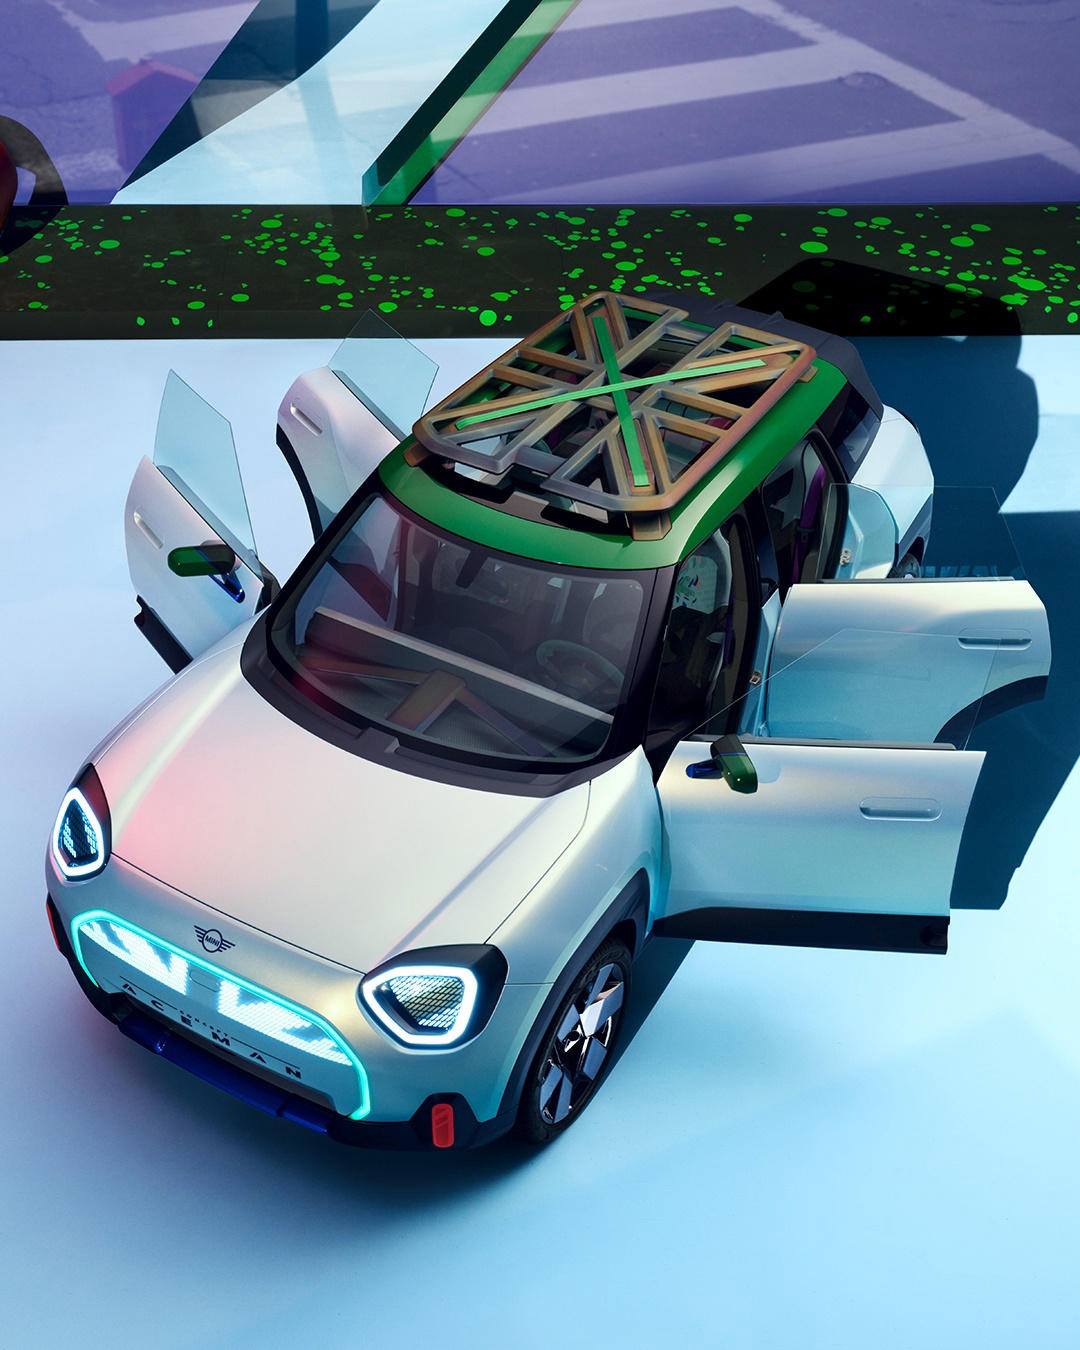 MINI - From its Icy Sunglow Green exterior to its MINI-malistic interior, swipe to explore the iconi